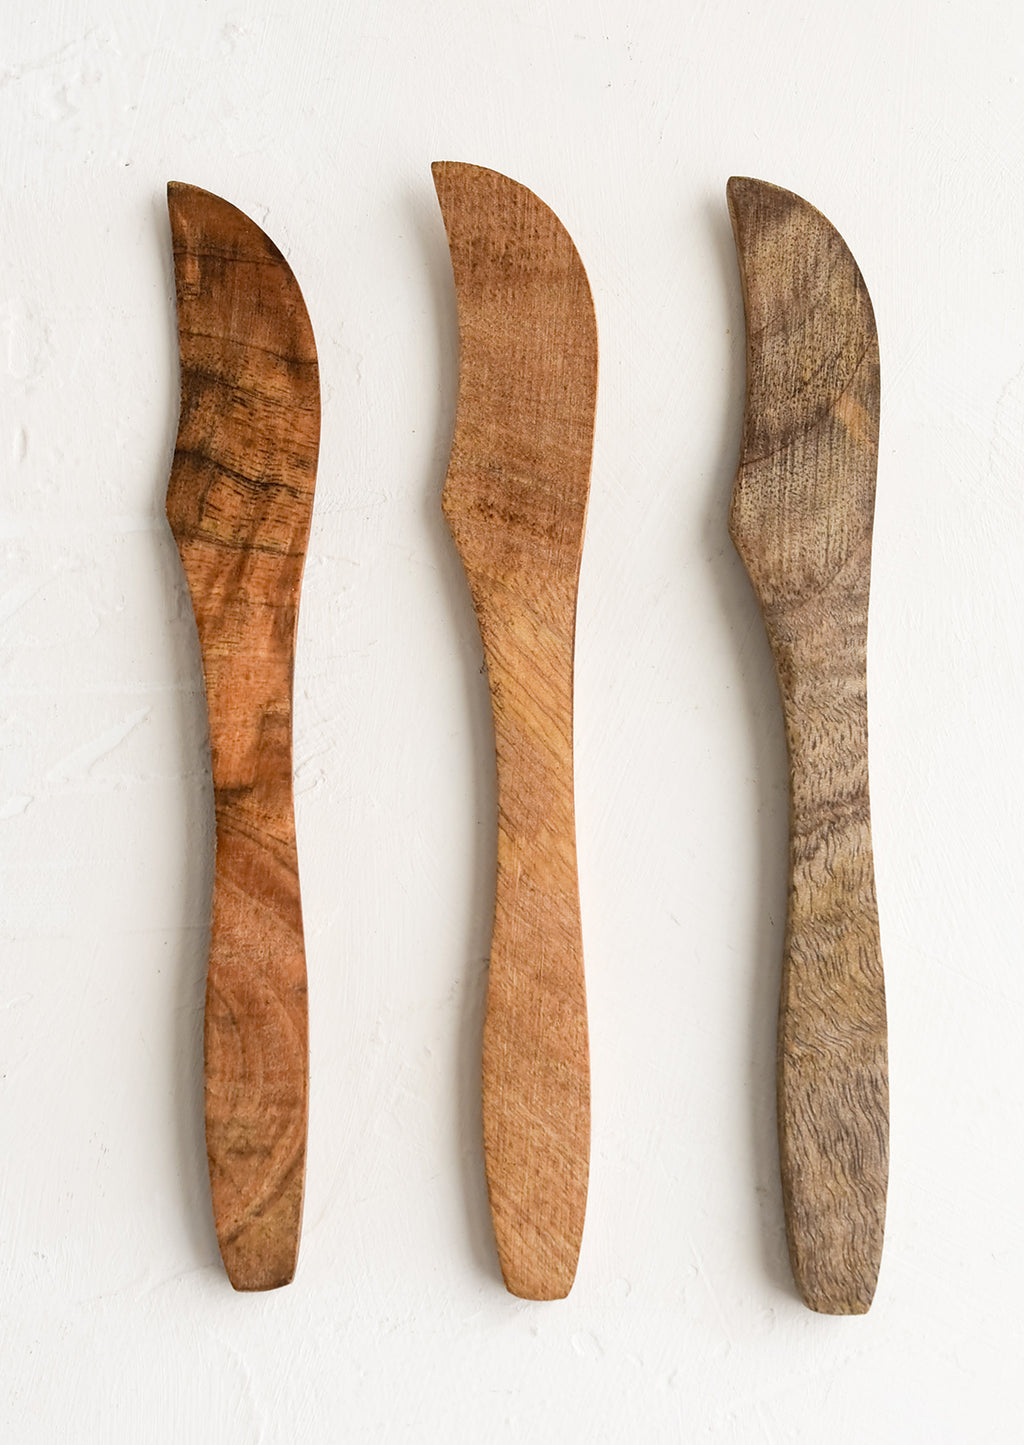 2: Wooden butter knives showing slightly varied wood colors.